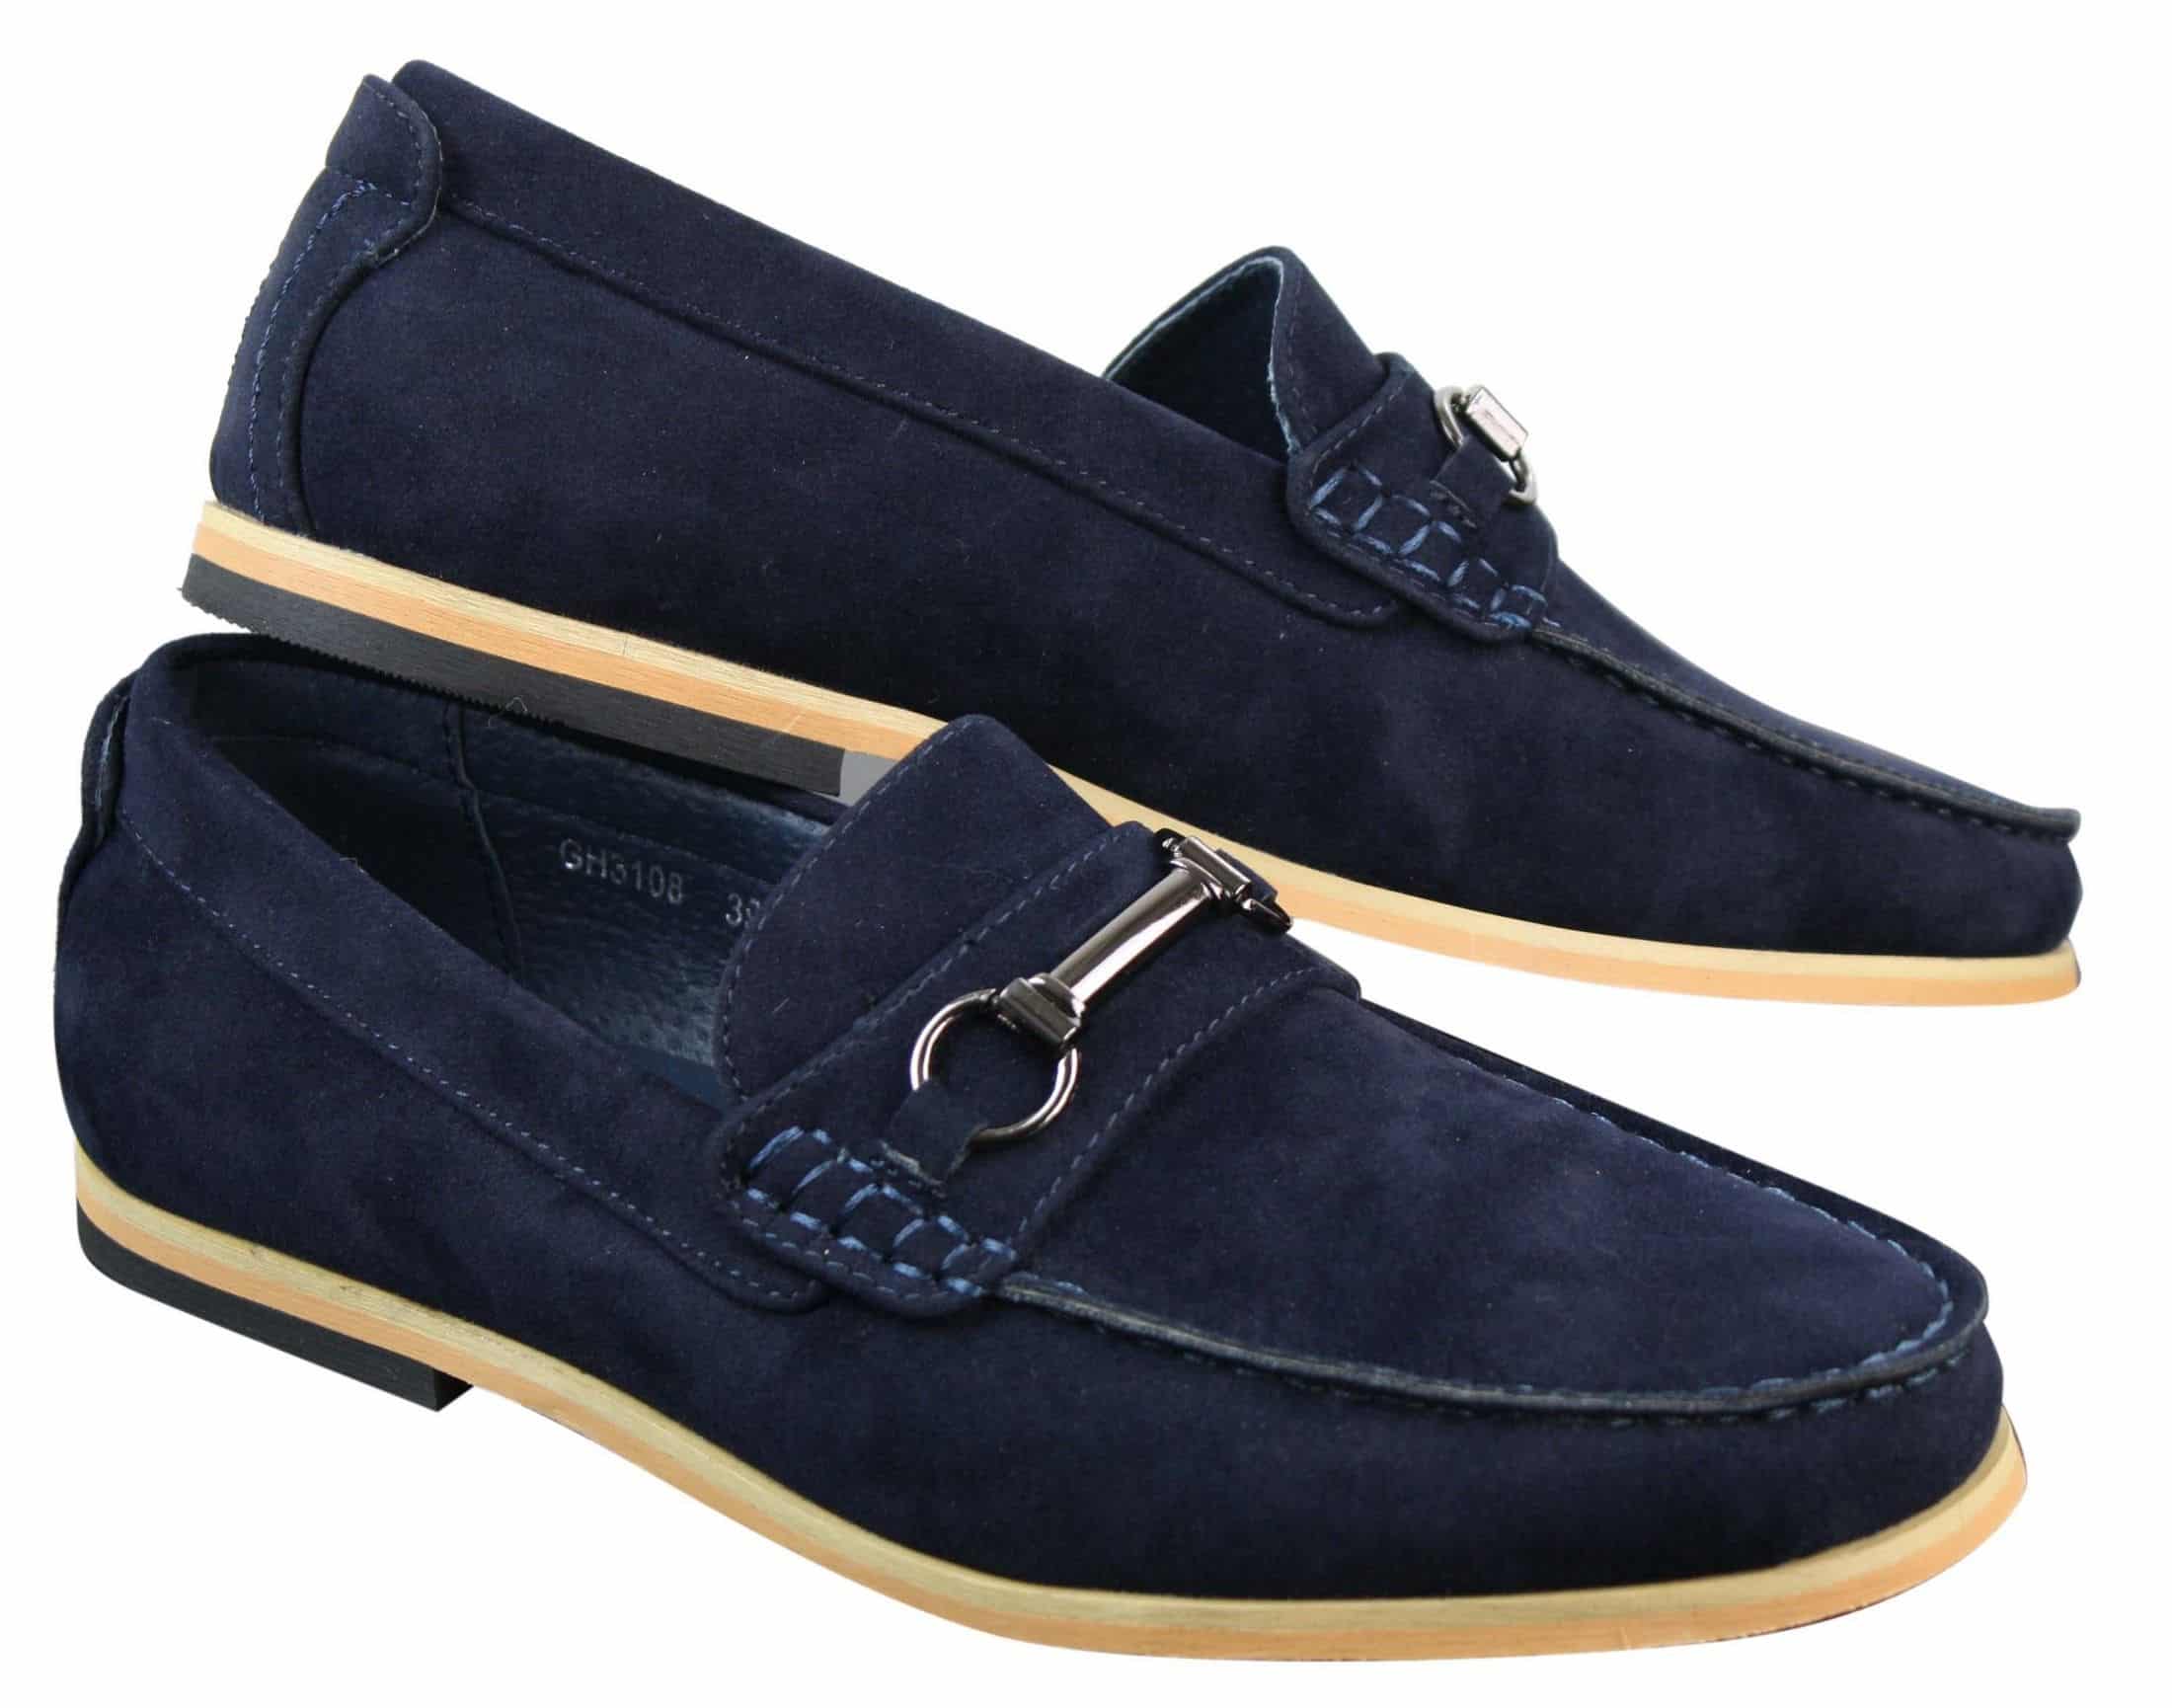 Mens Slip On Buckle Horsebit Driving Shoes Loafers Retro Smart Casual ...